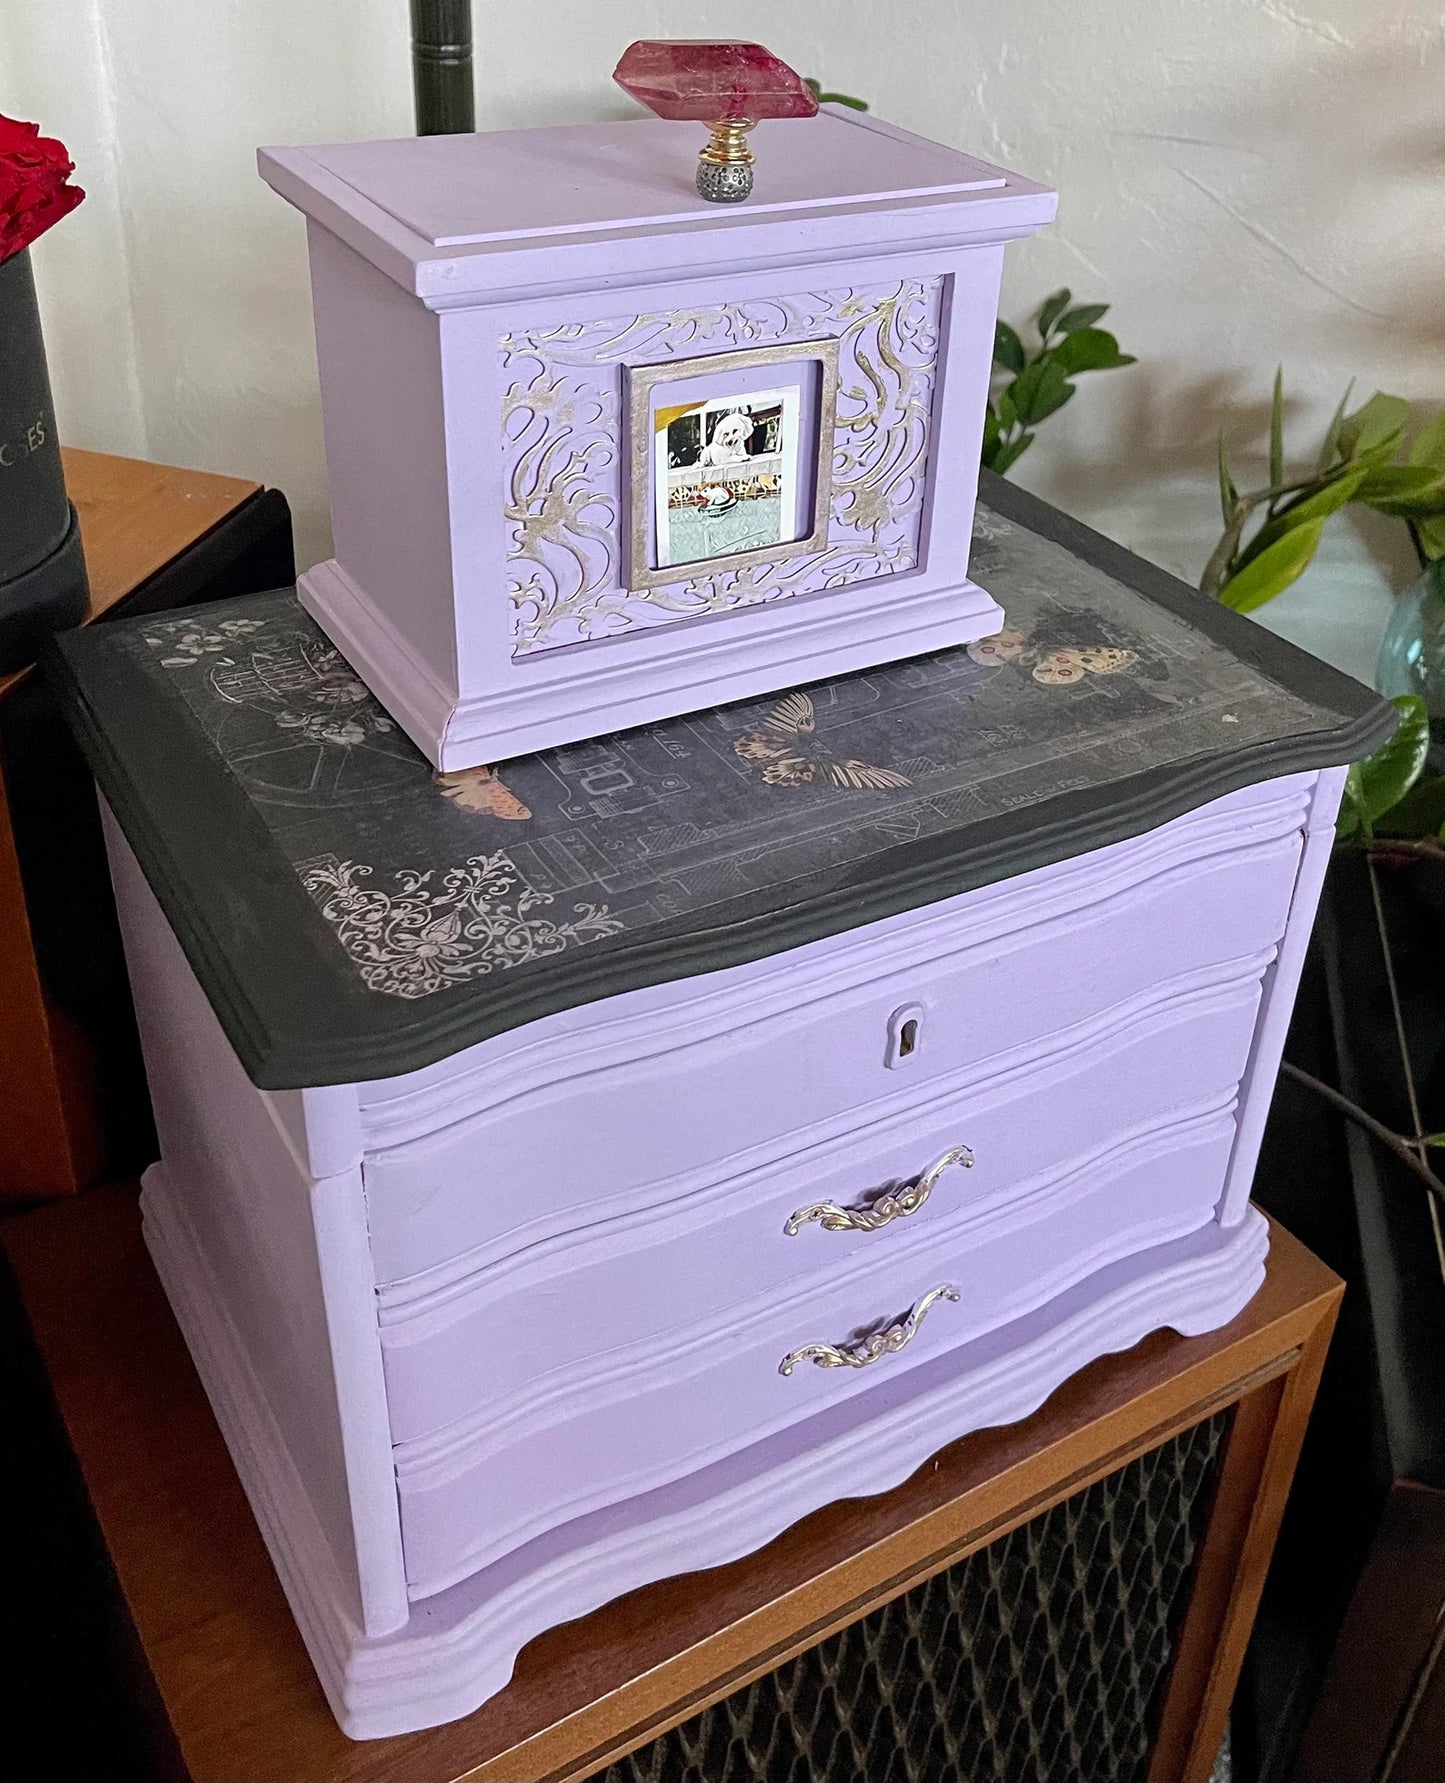 Large Lovecycled Vintage Jewelry Chest, Pet Photo Frame